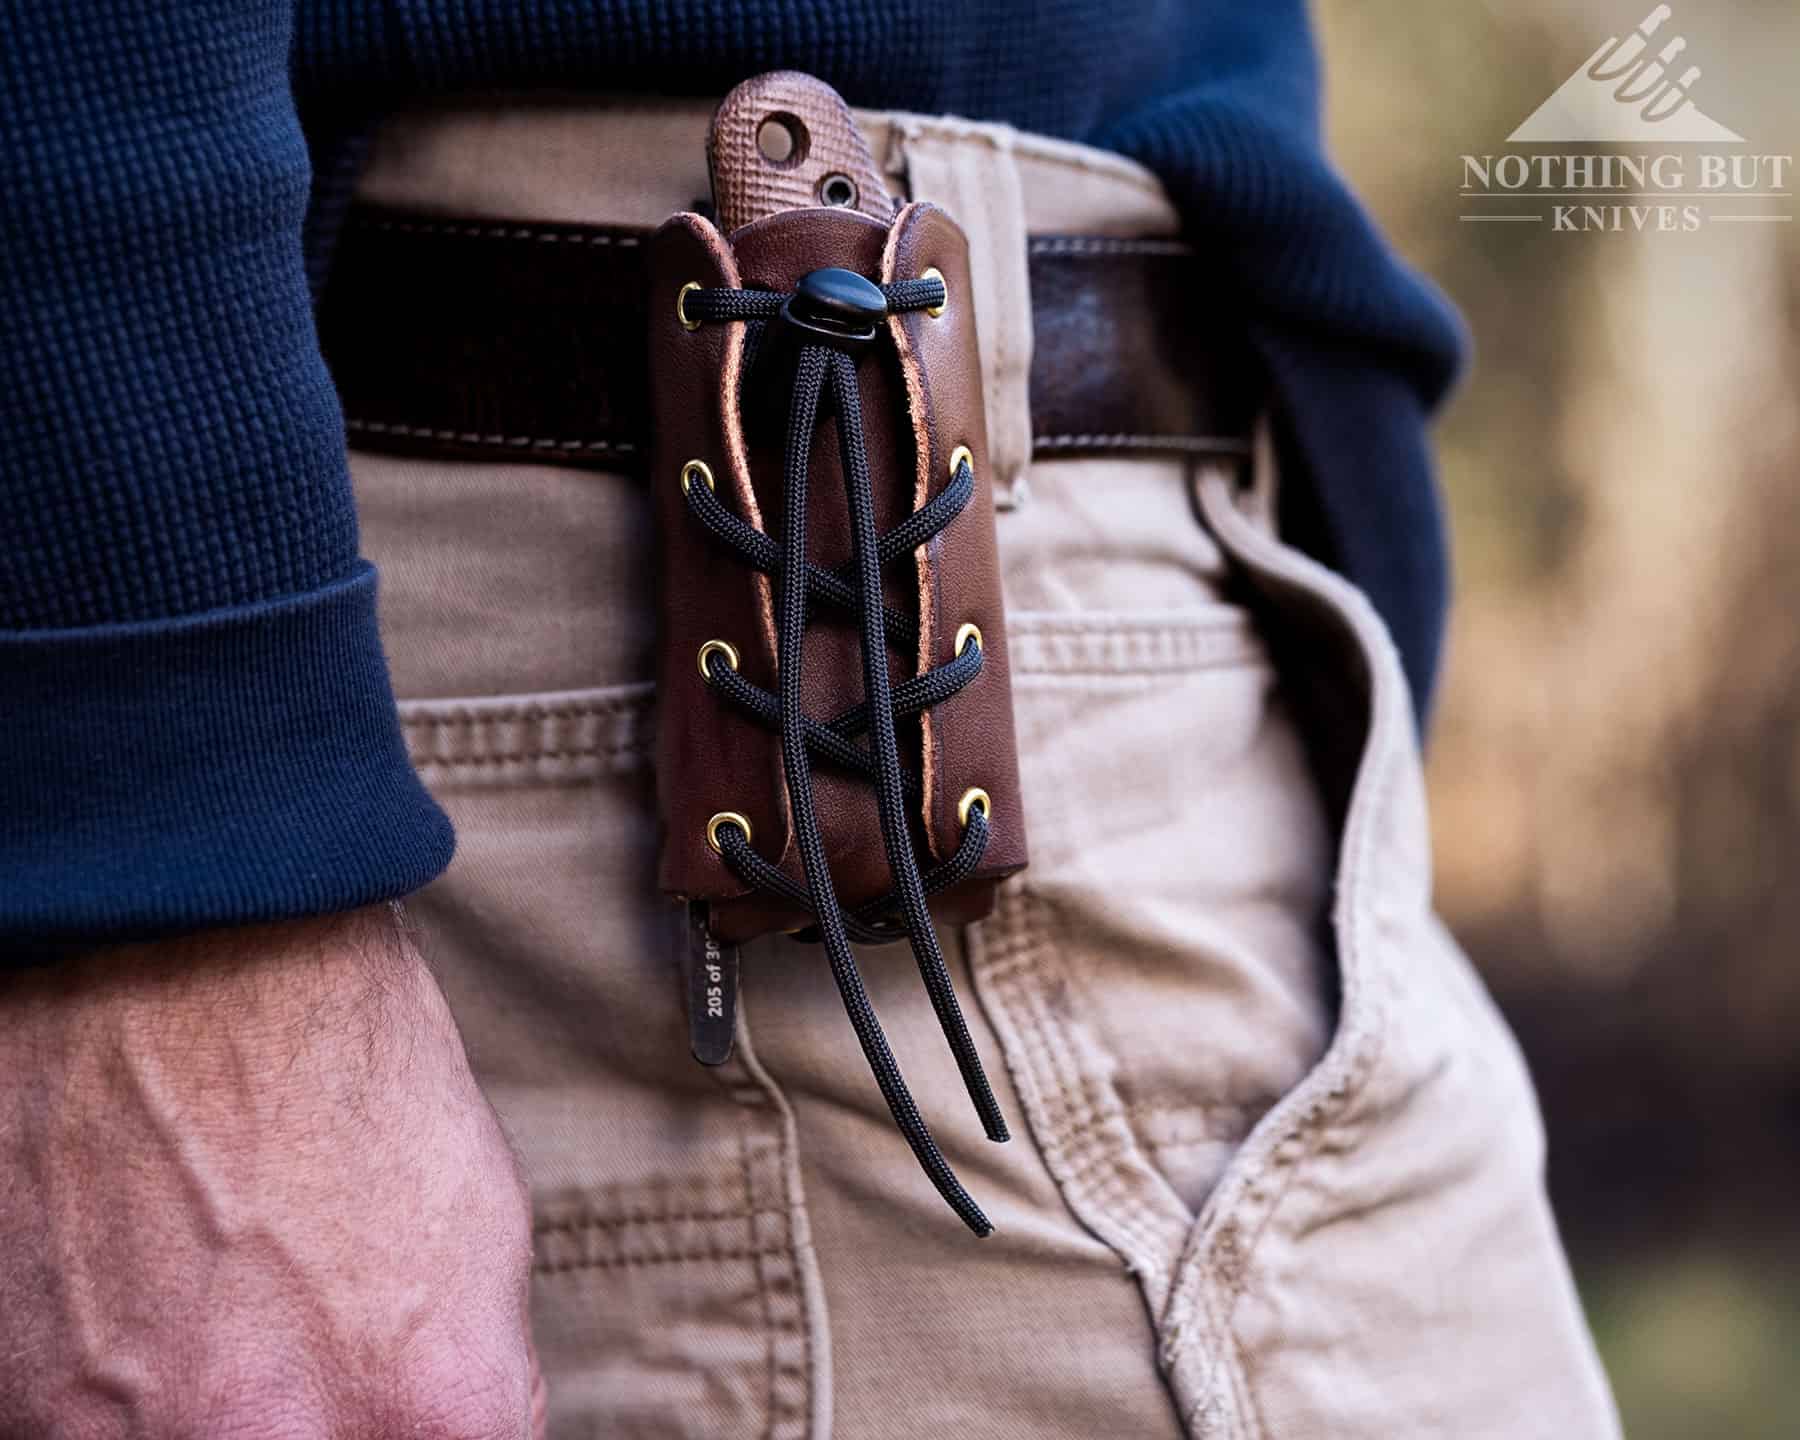 The Esee Pinhoti sheath is one of our all time favorite folding knife sheaths.